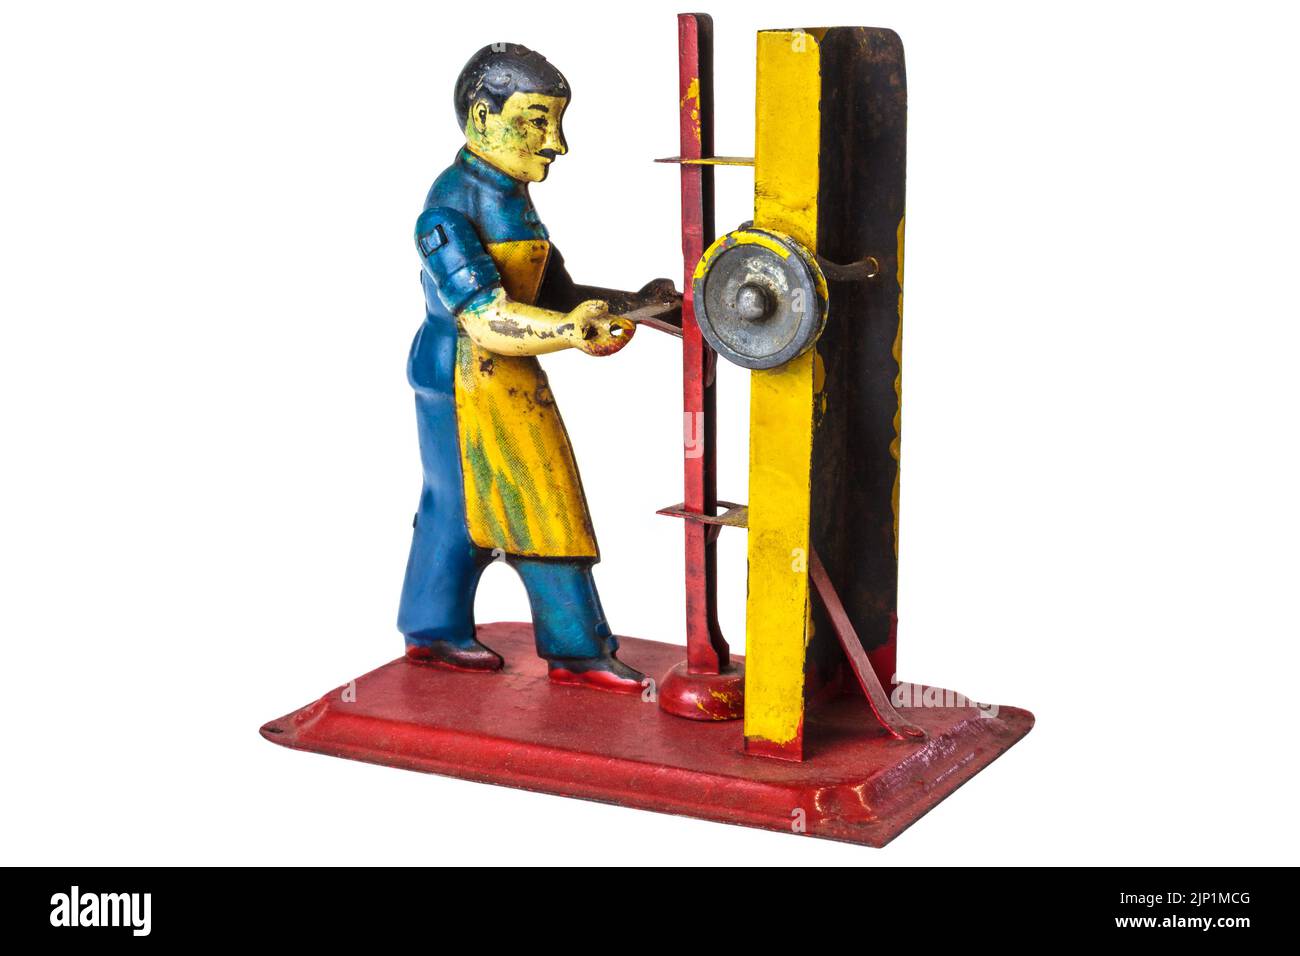 Vintage metal toy of a factory worker isolated on a white background Stock Photo